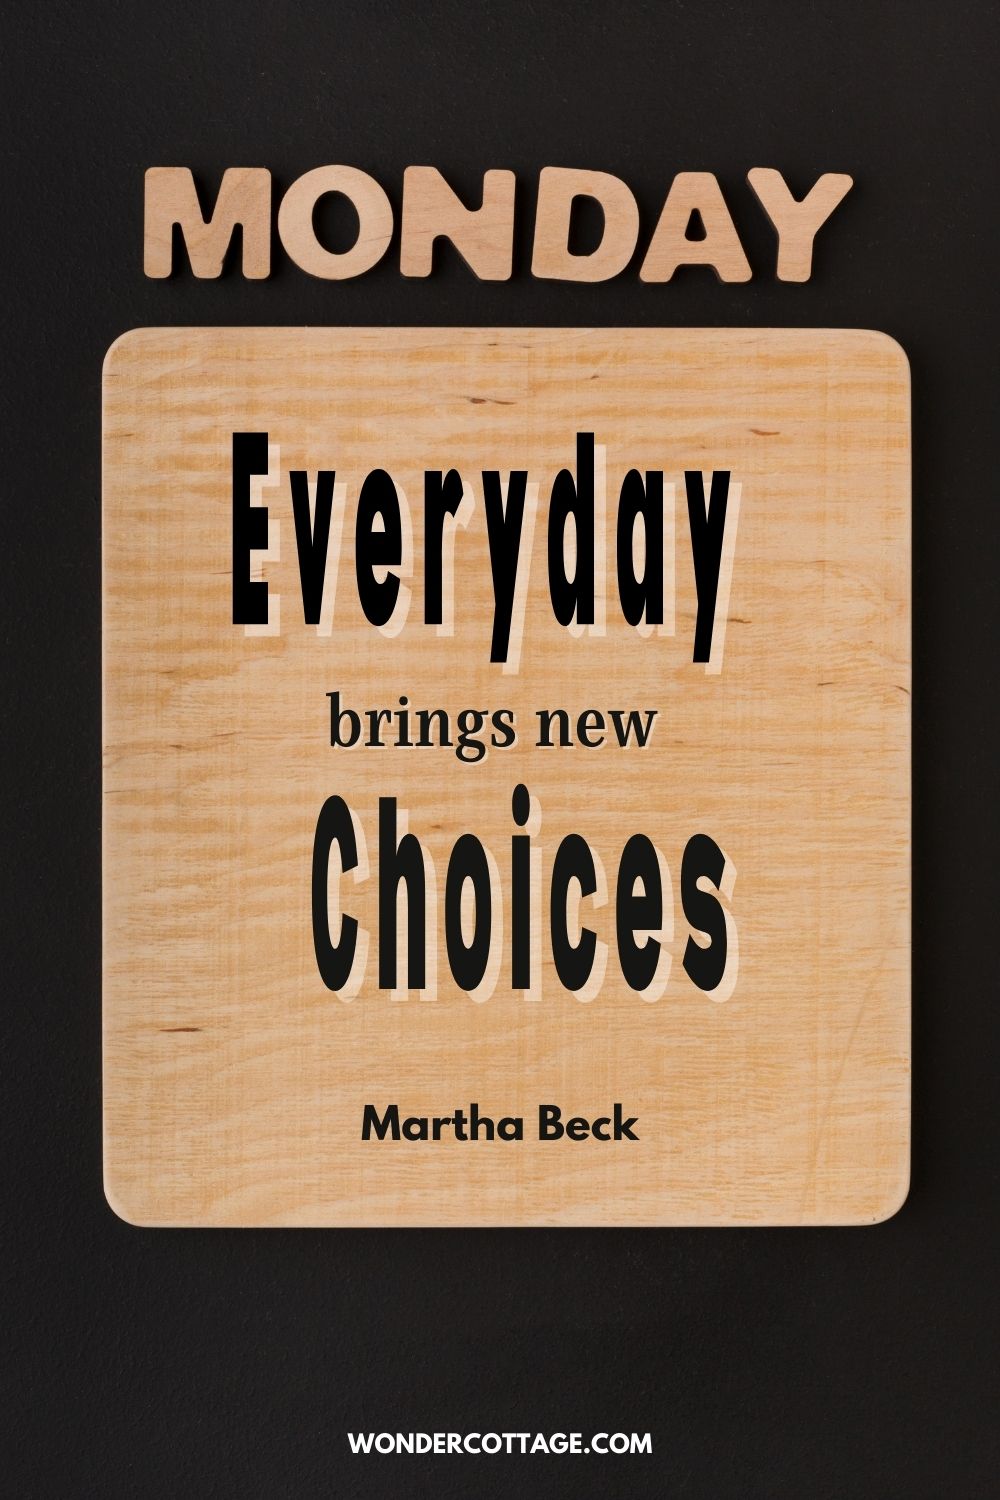 Every day brings new choices. Martha Beck